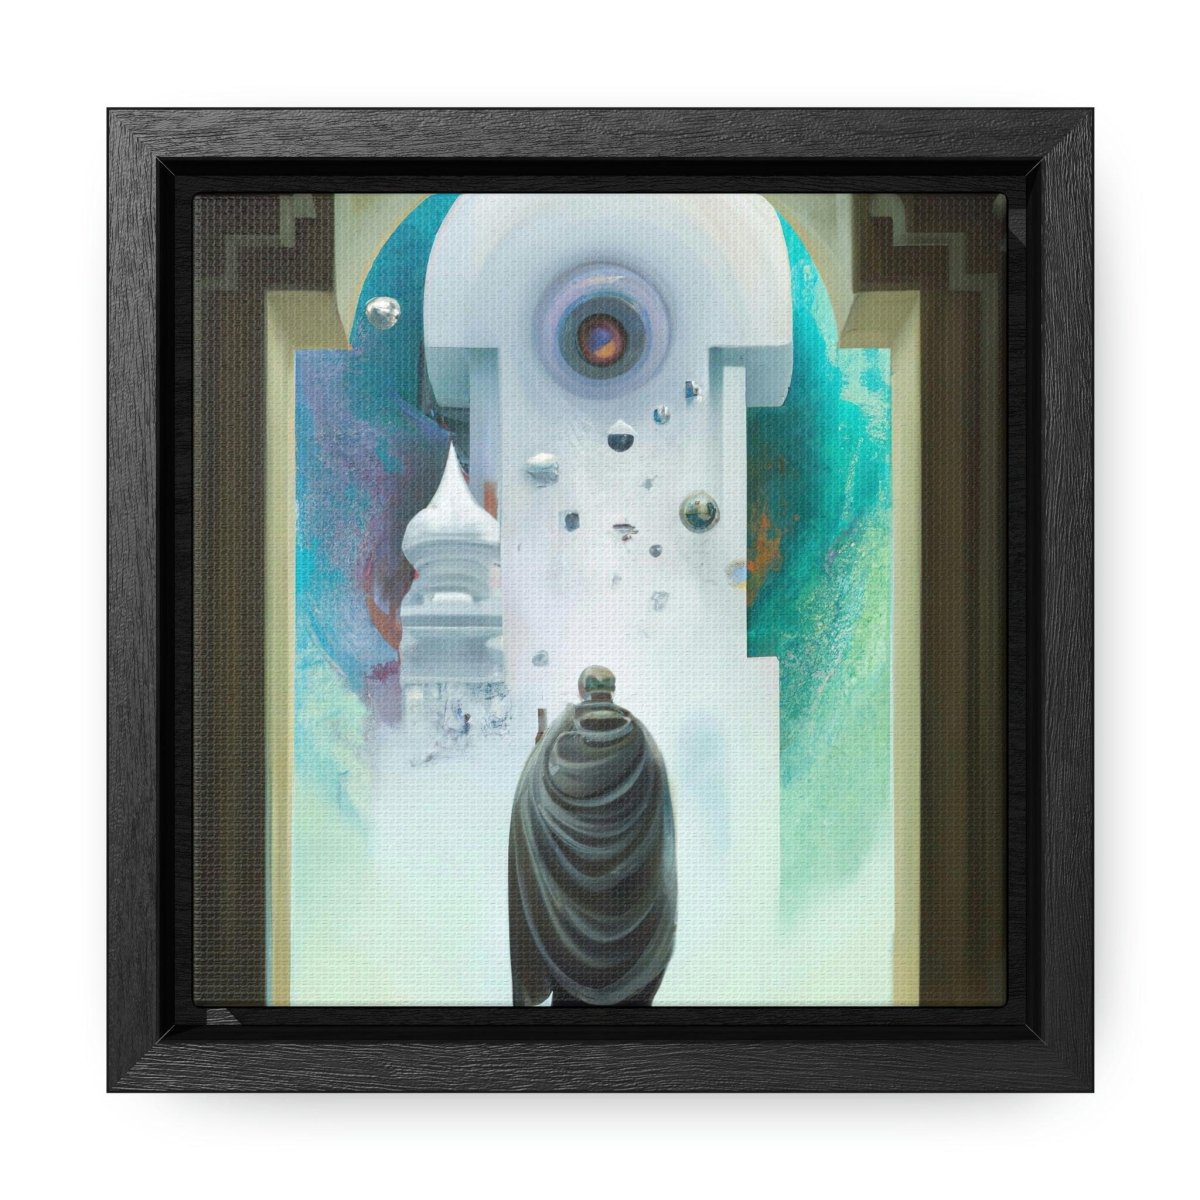 Reality Shifting Nomad Arriving In an Abstract Dimension - Framed Digital Art - HigherFrequencies